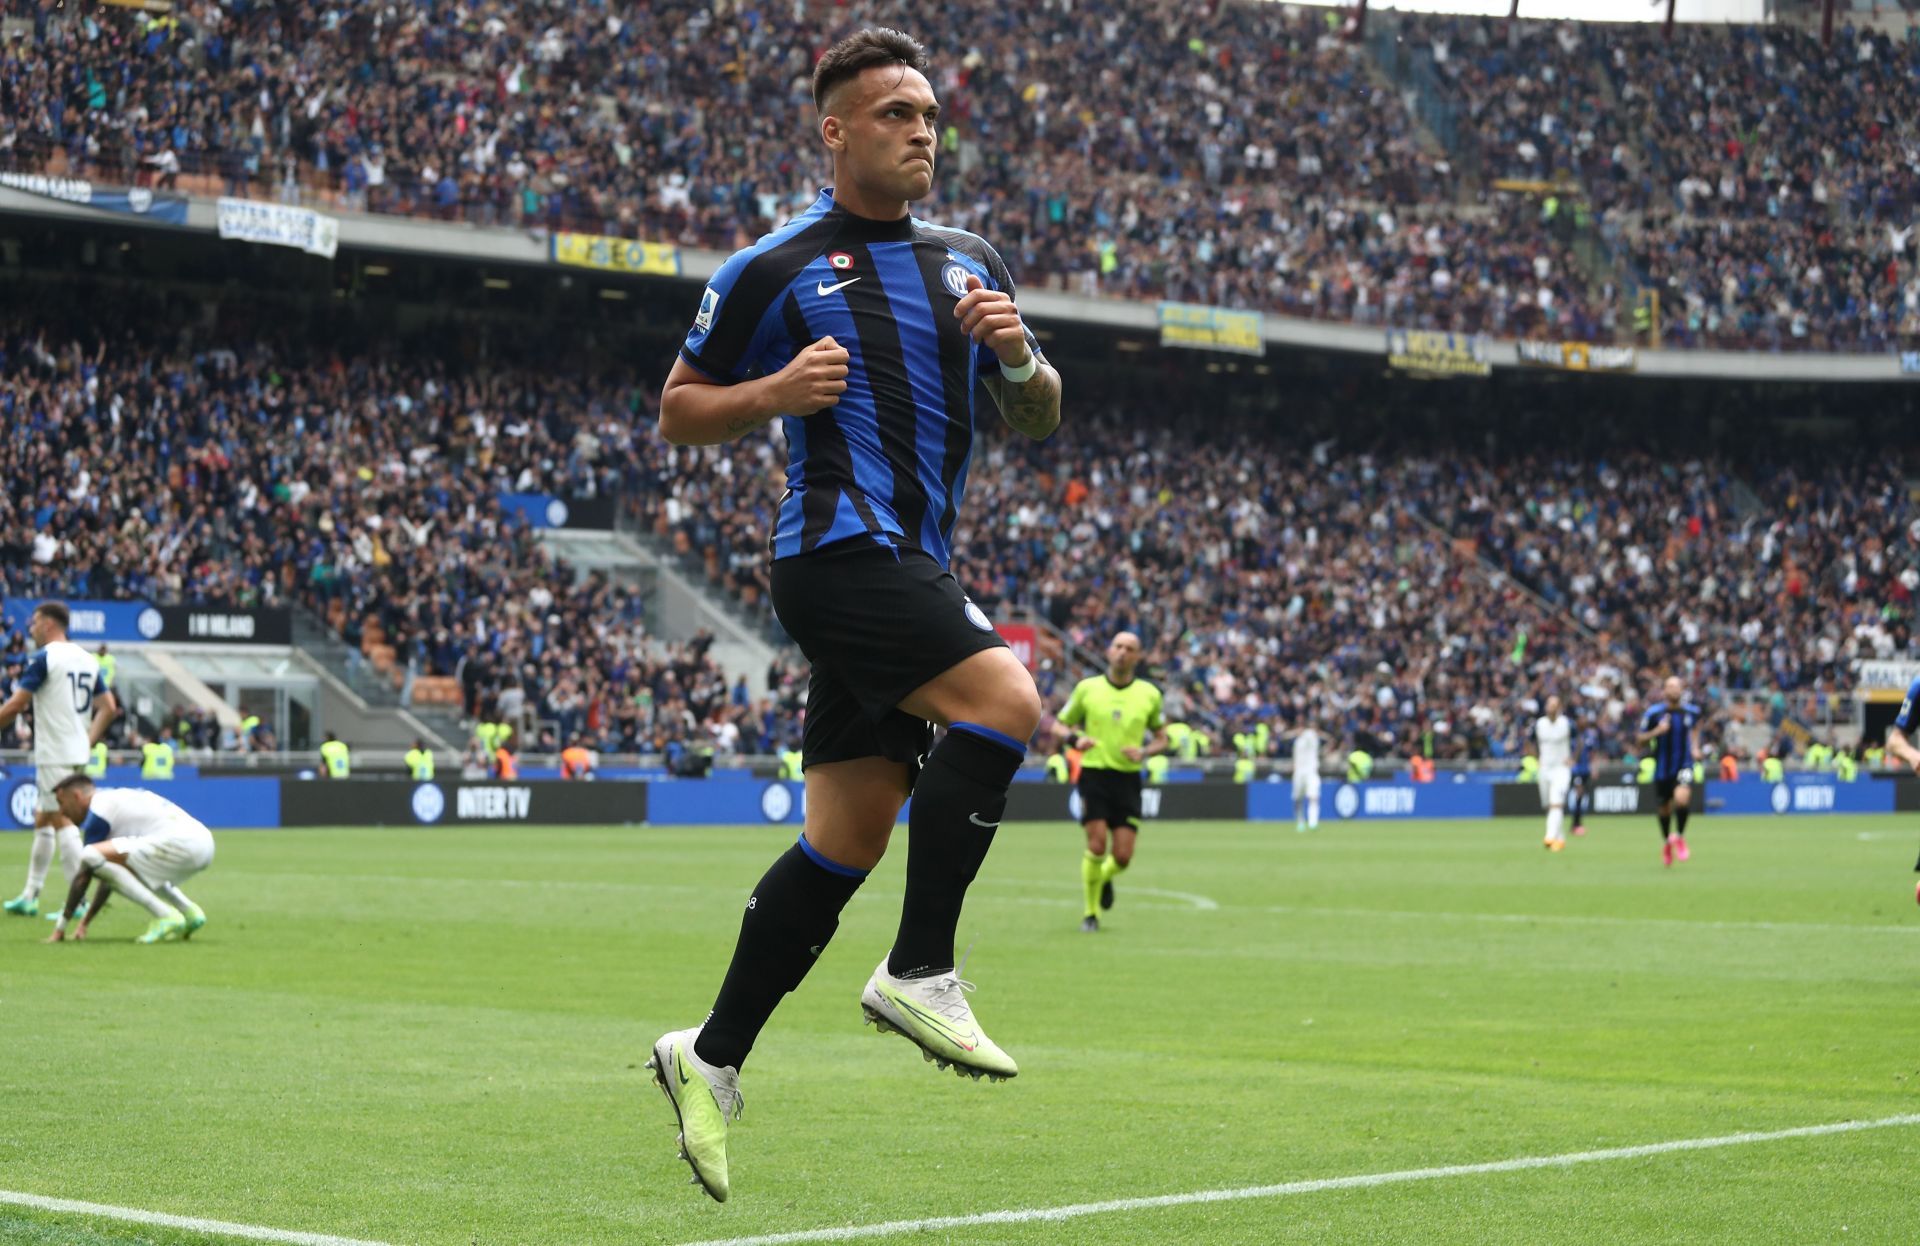 Lautaro Martinez has admirers at Old Trafford.